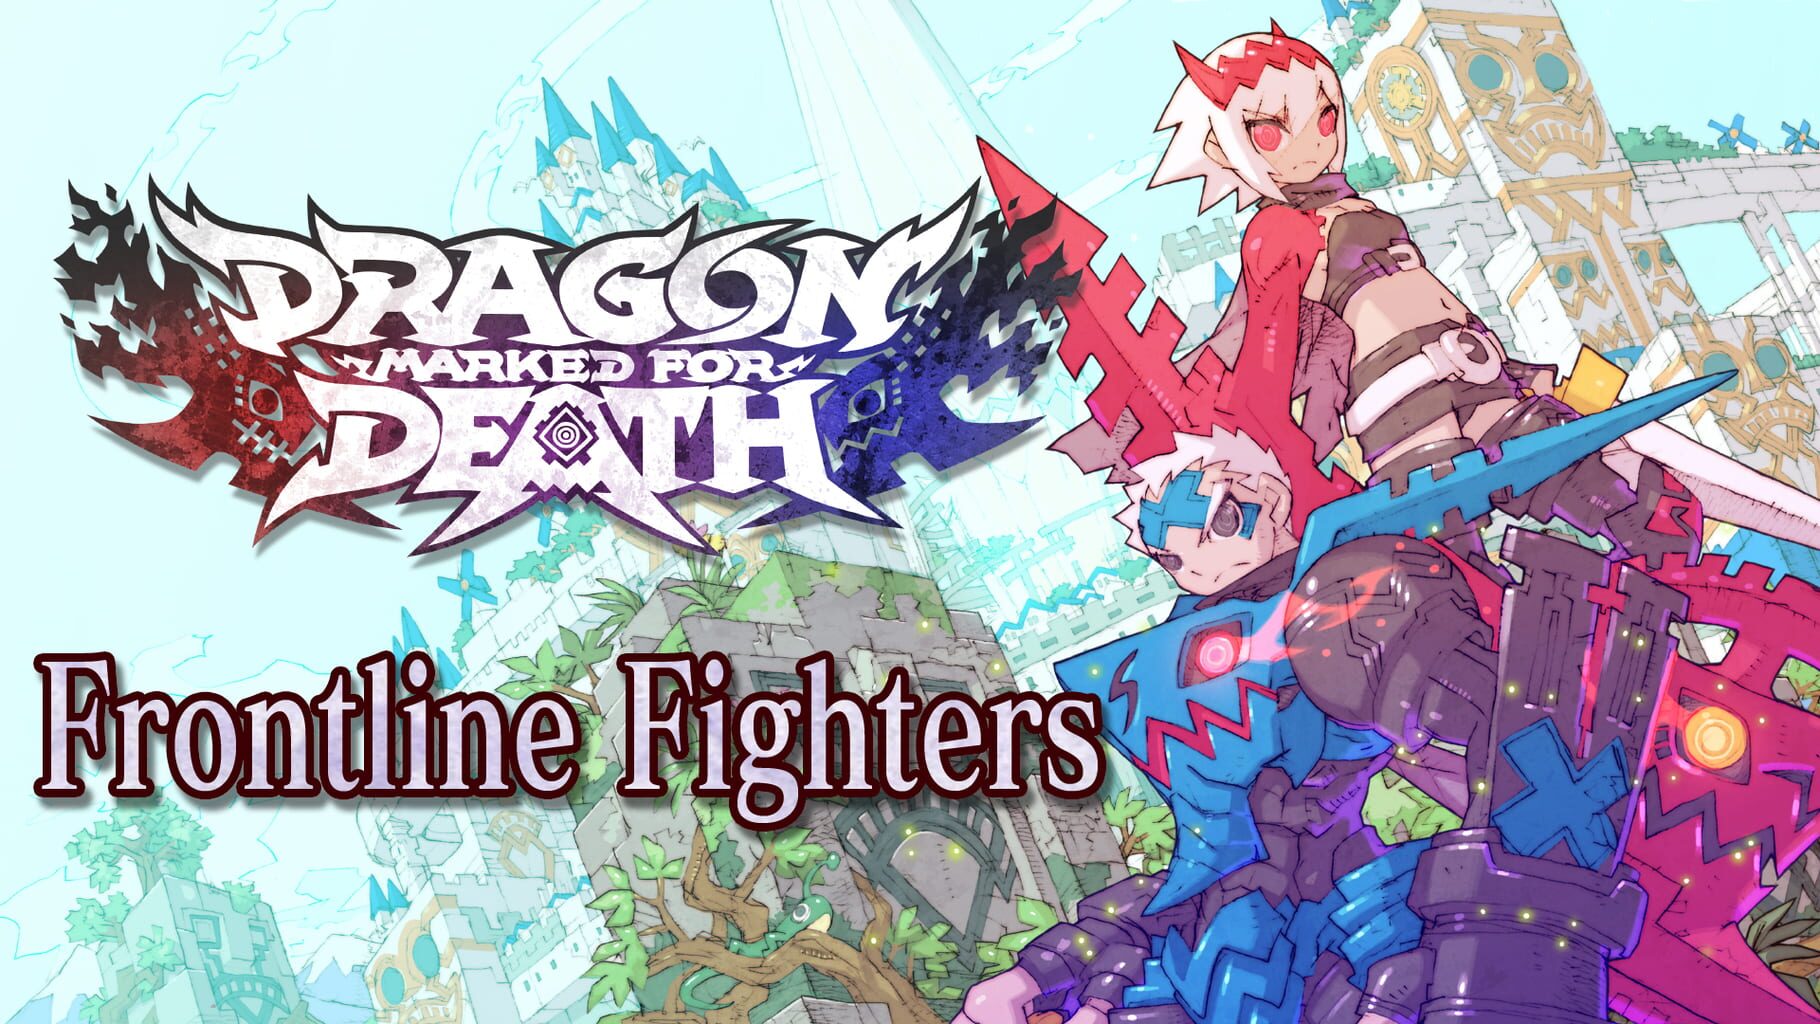 Dragon Marked for Death: Frontline Fighters artwork